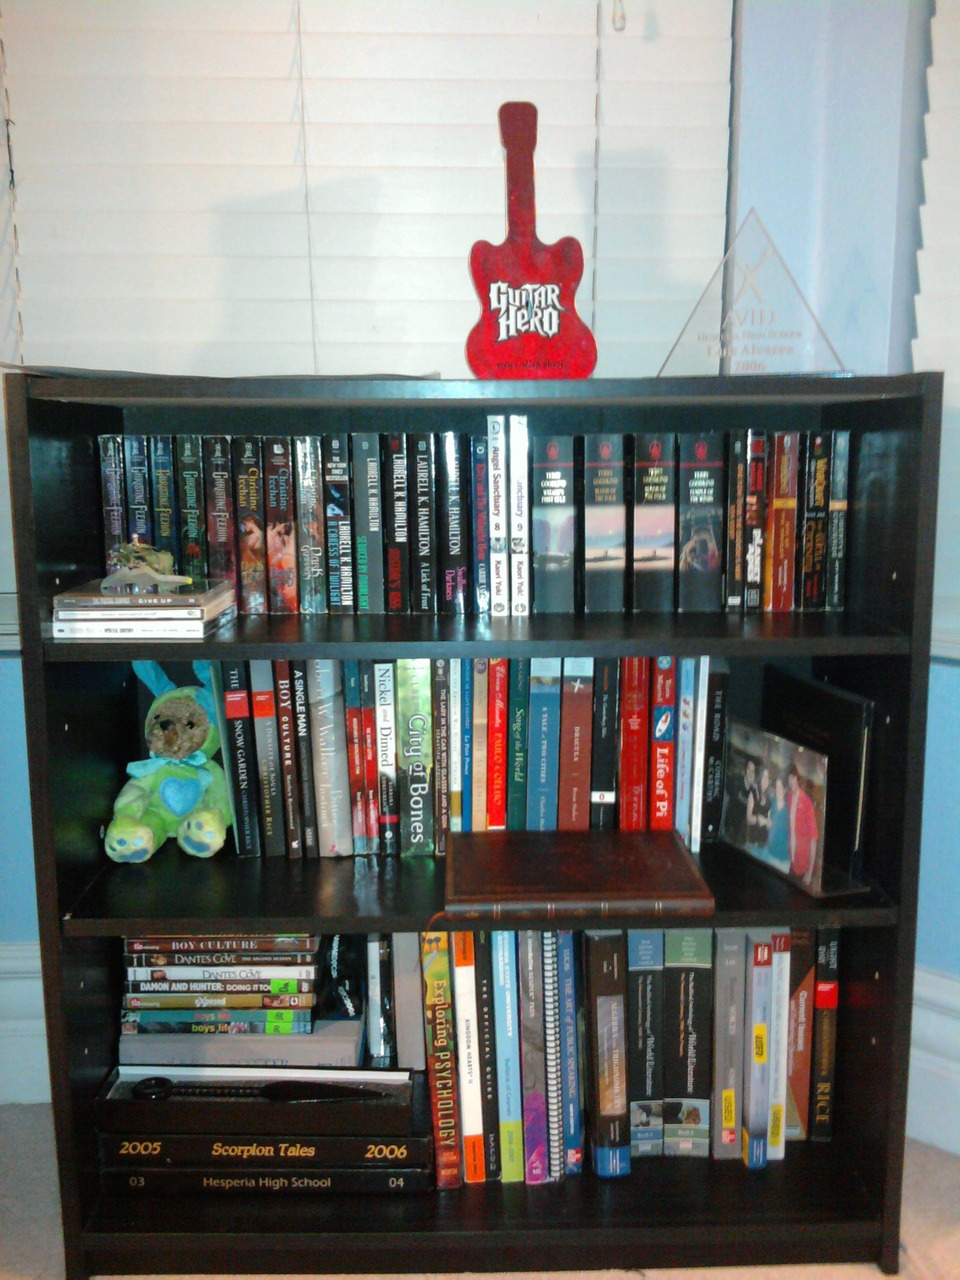 So I finally bought myself a bookshelf and set it all up. I am very happy I have